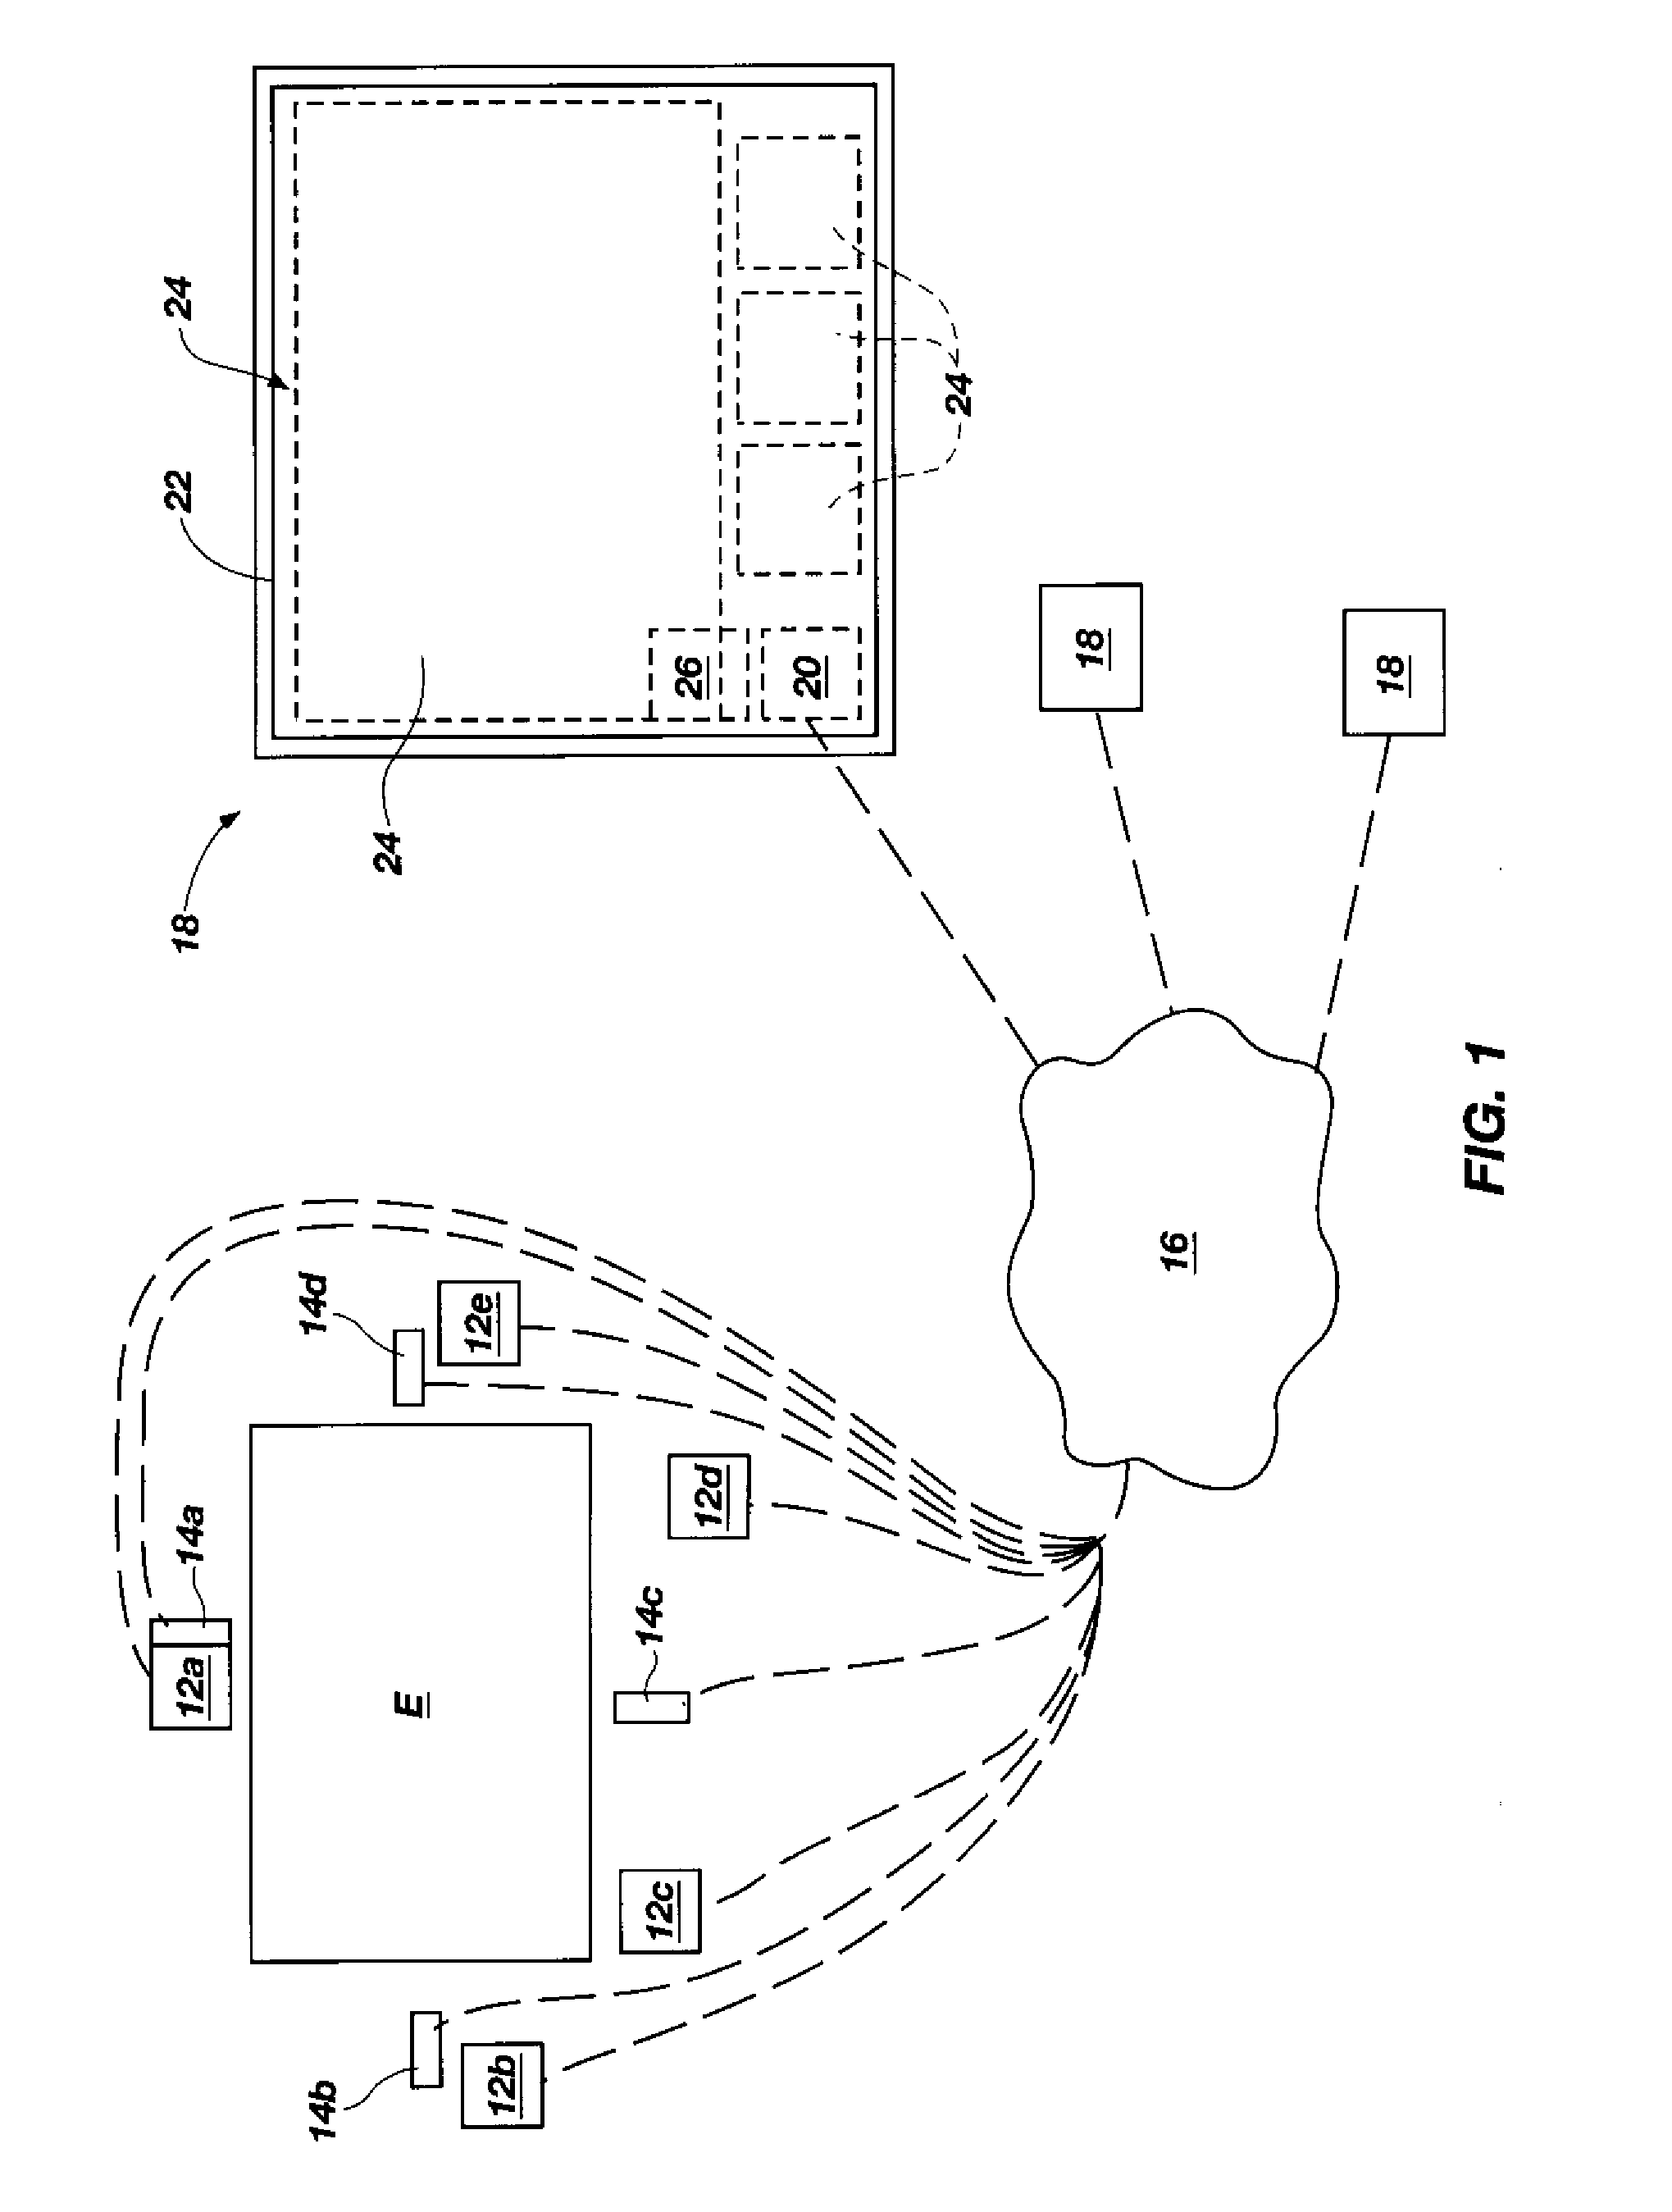 Media systems and methods for providing synchronized multiple streaming camera signals of an event